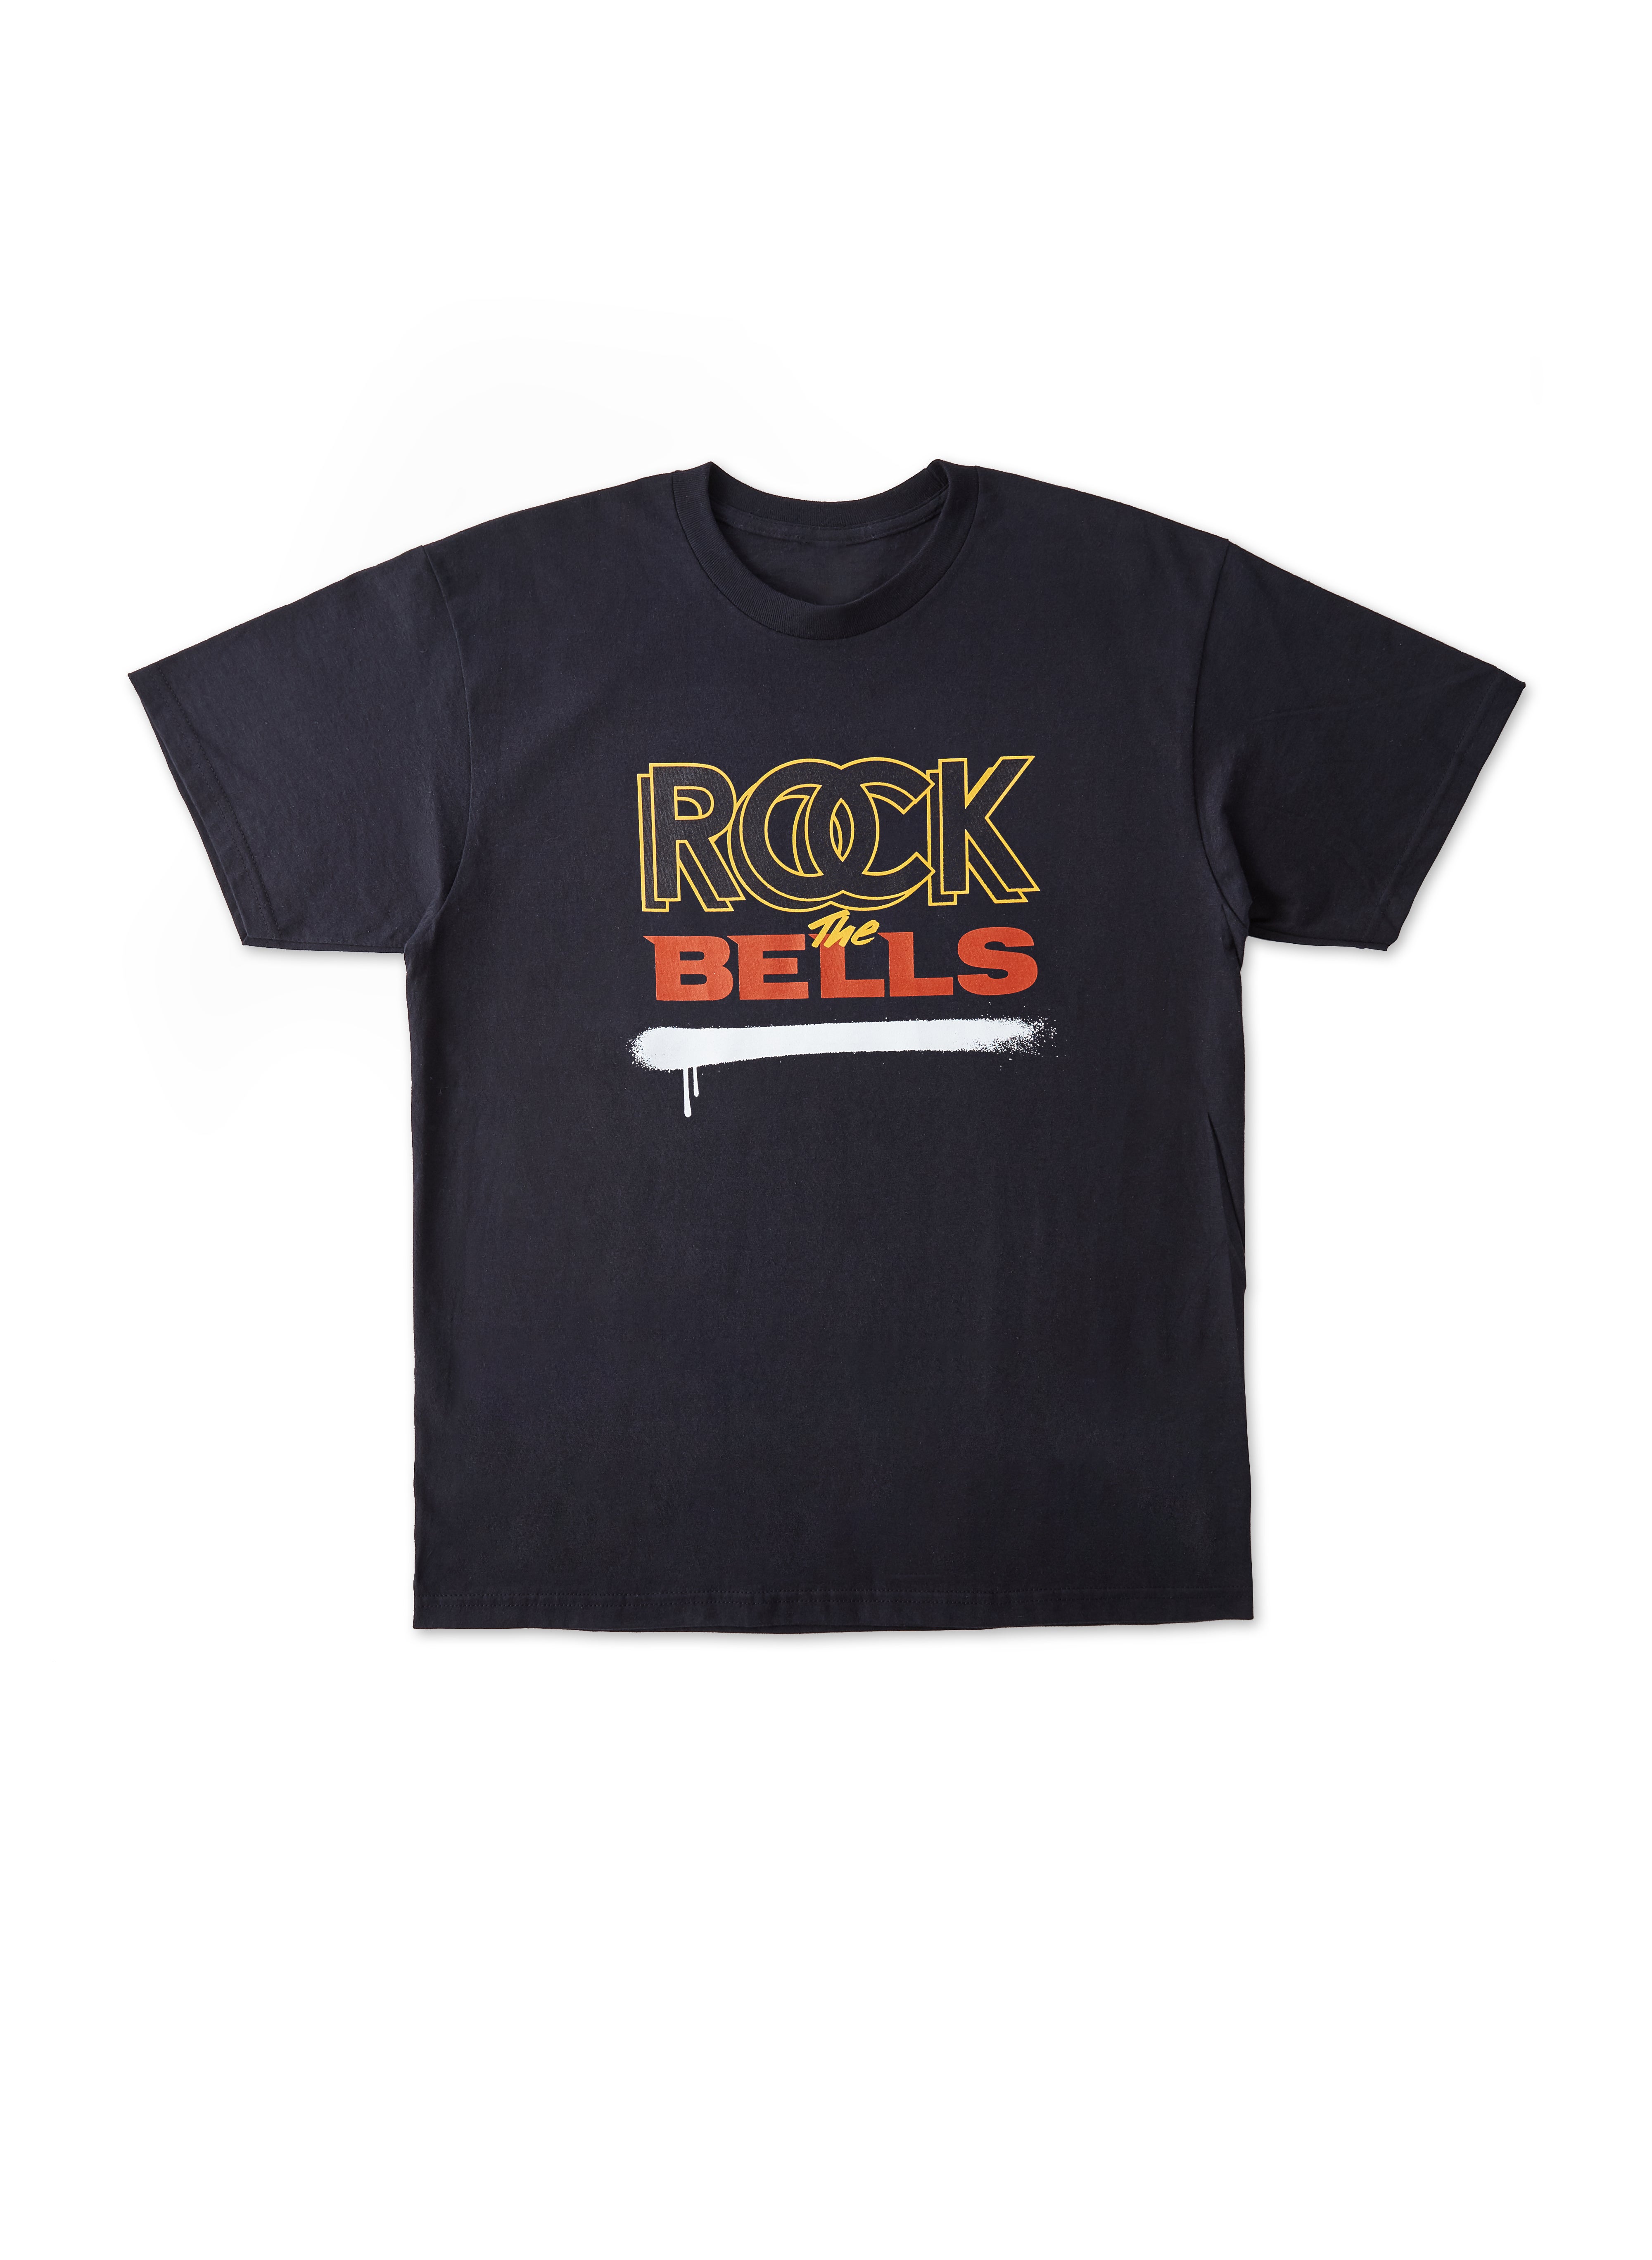 Legendary Rapper LL Cool J Expands His Rock the Bells Collection | Essence